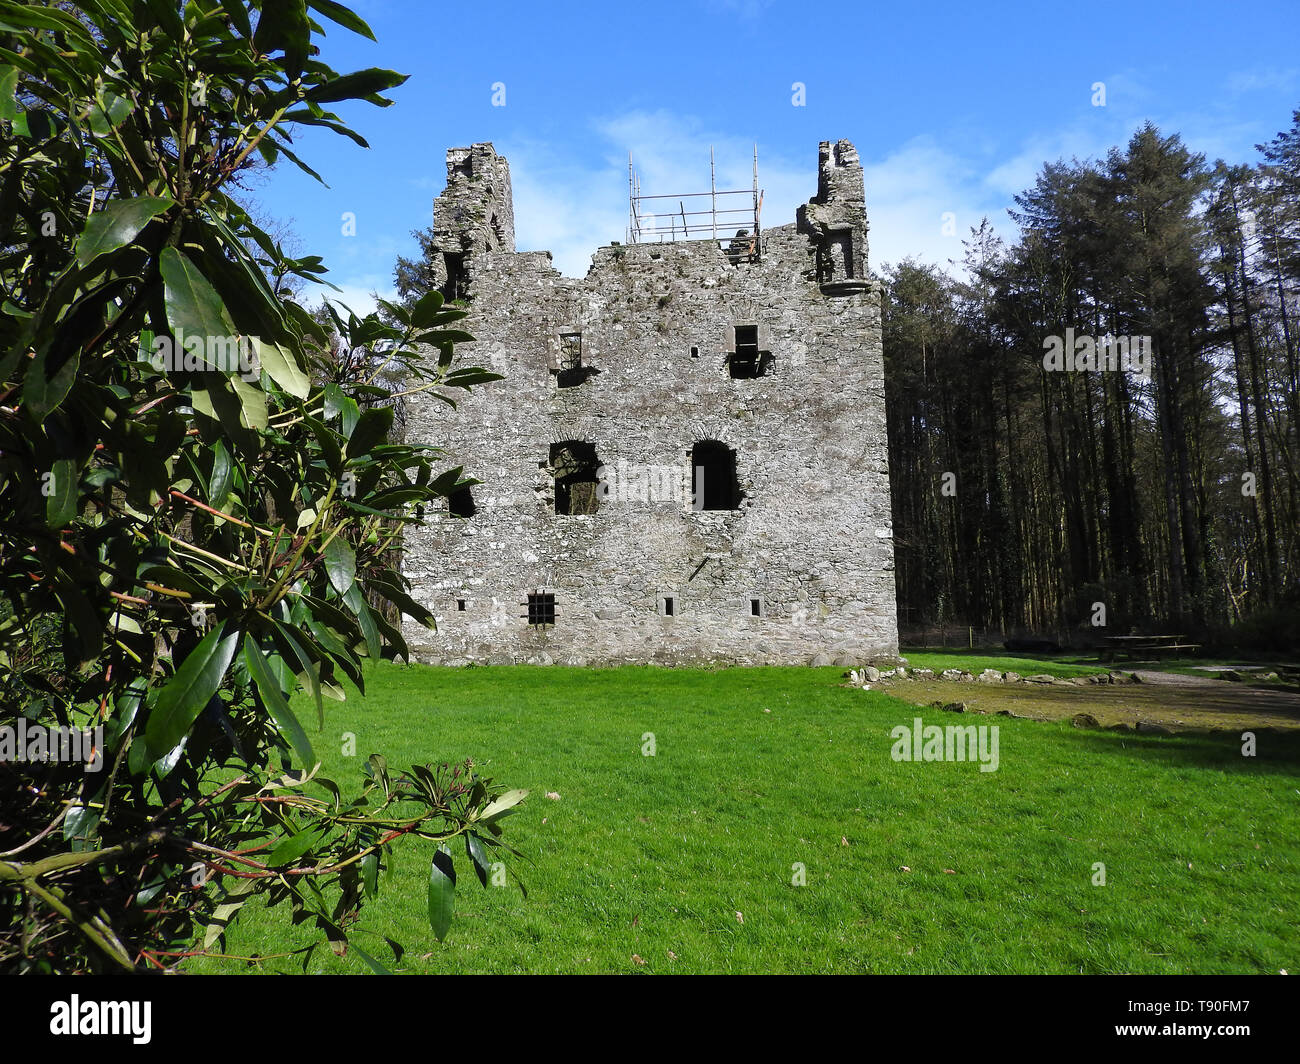 Sorbie Tower, (Fortified Tower House - ancient seat of the Clan Hannay) - at Sorbie, Wigtownshire,Dumfries and Galloway, Scotland.  Believed to be built by  Patrick Hannay, poet and courtier at the court of James VI. Ir was later owned by the Earl of Galloway -2019 photo Stock Photo